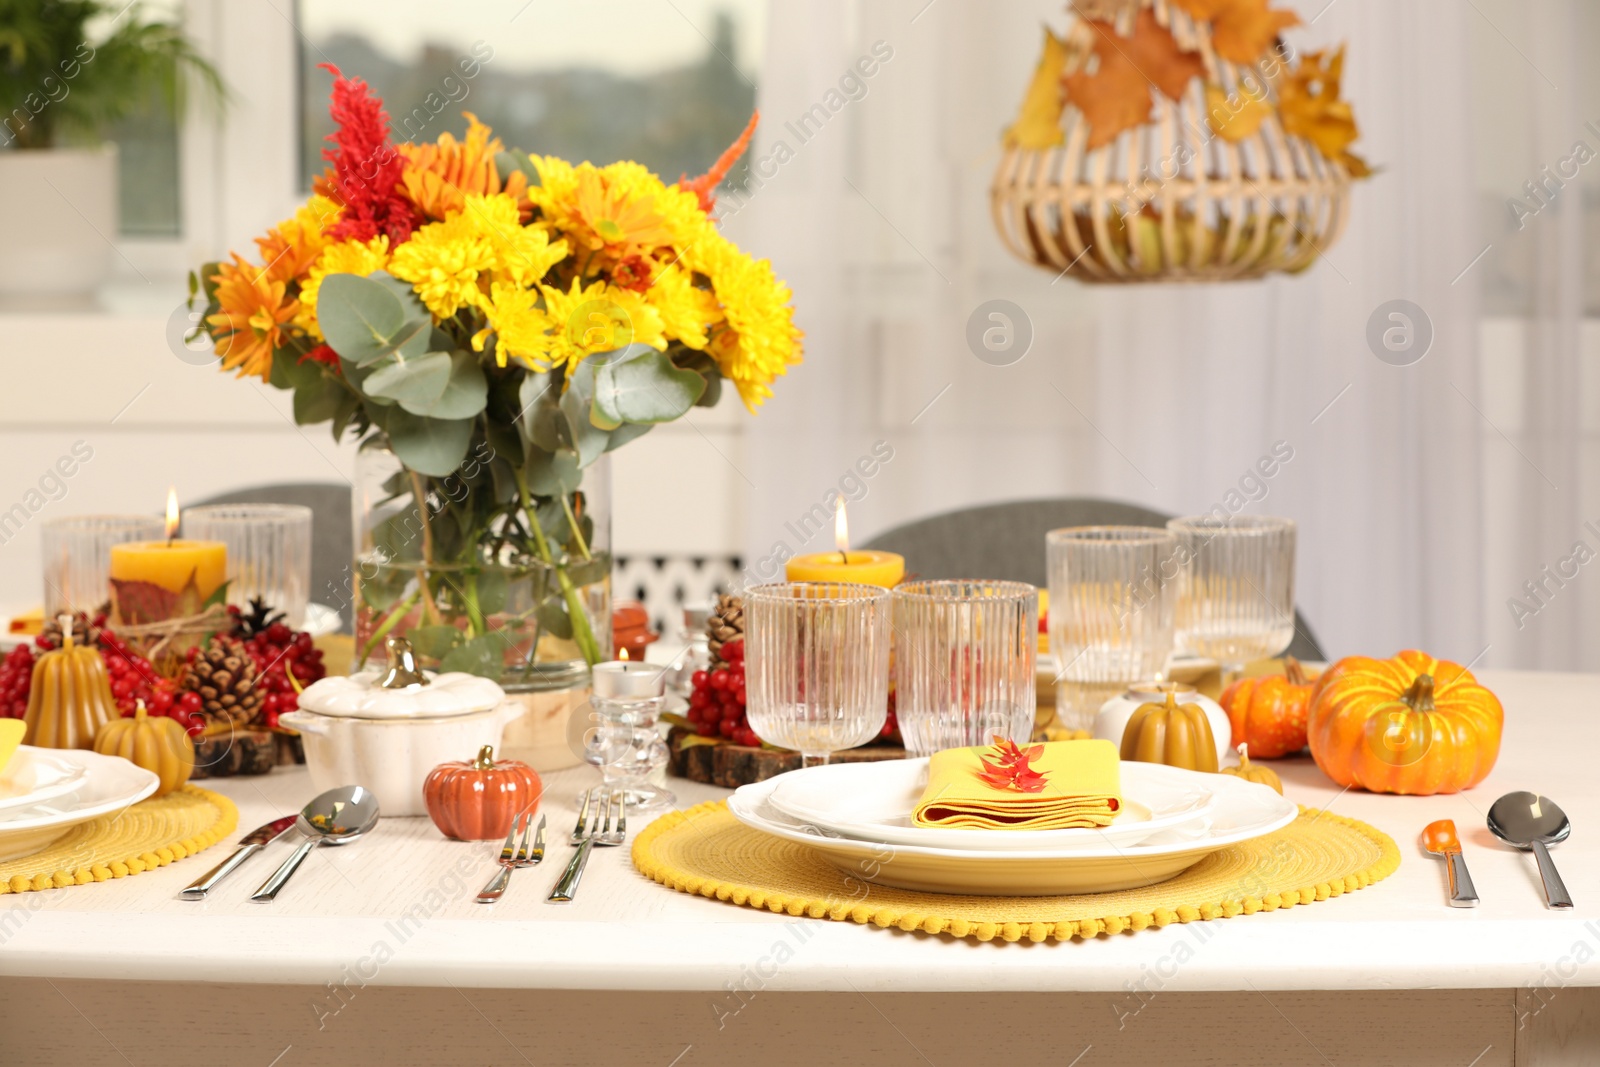 Photo of Autumn table setting with floral decor and pumpkins indoors